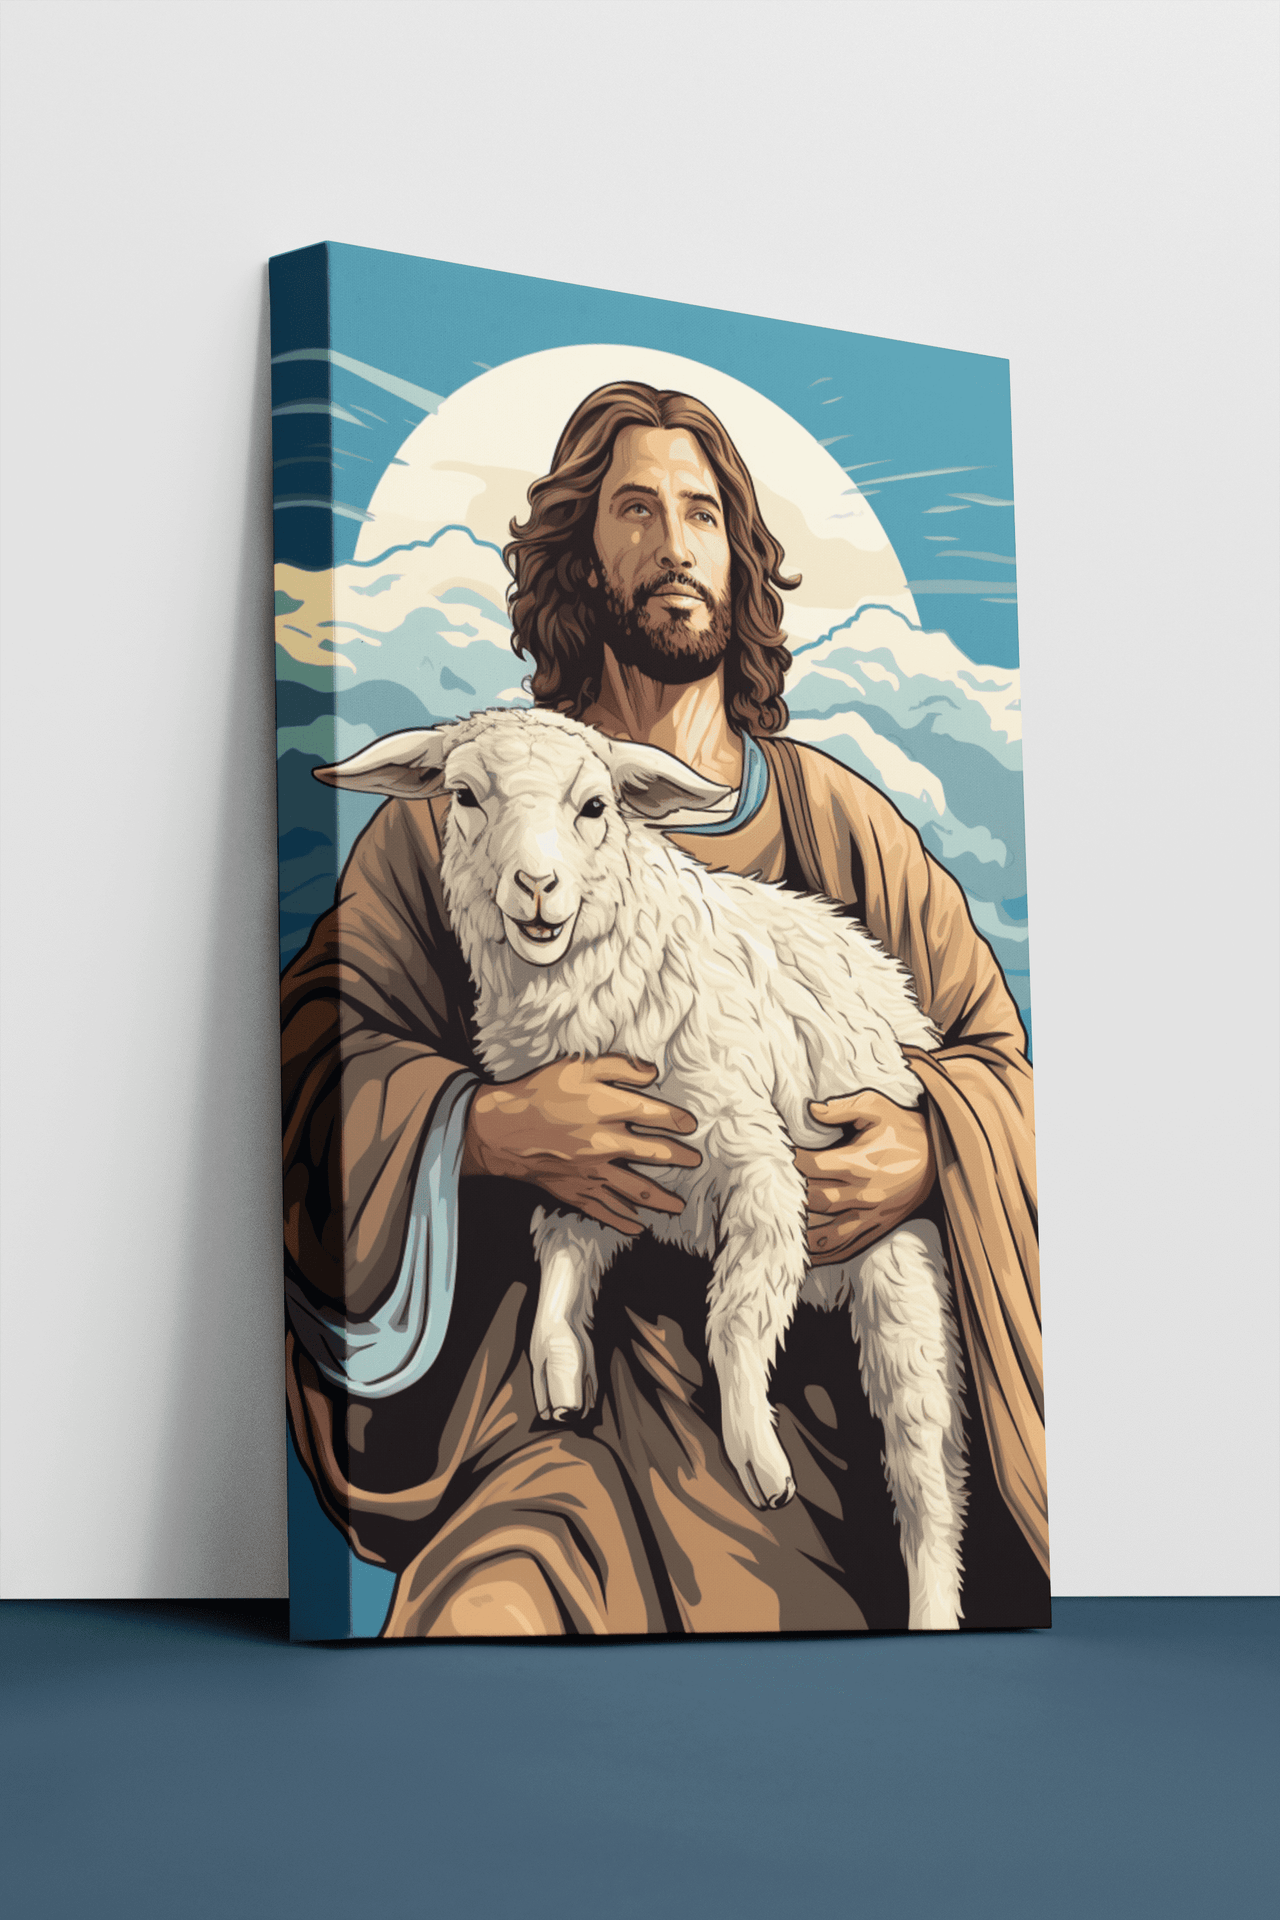 Jesus and Lamb Art Canvas, Jesus Holding the Lost Lamb, Loss Lamb Art Canvas, Jesus Lamb of God, Jesus and Lamb No Words, Christian Wall Decor